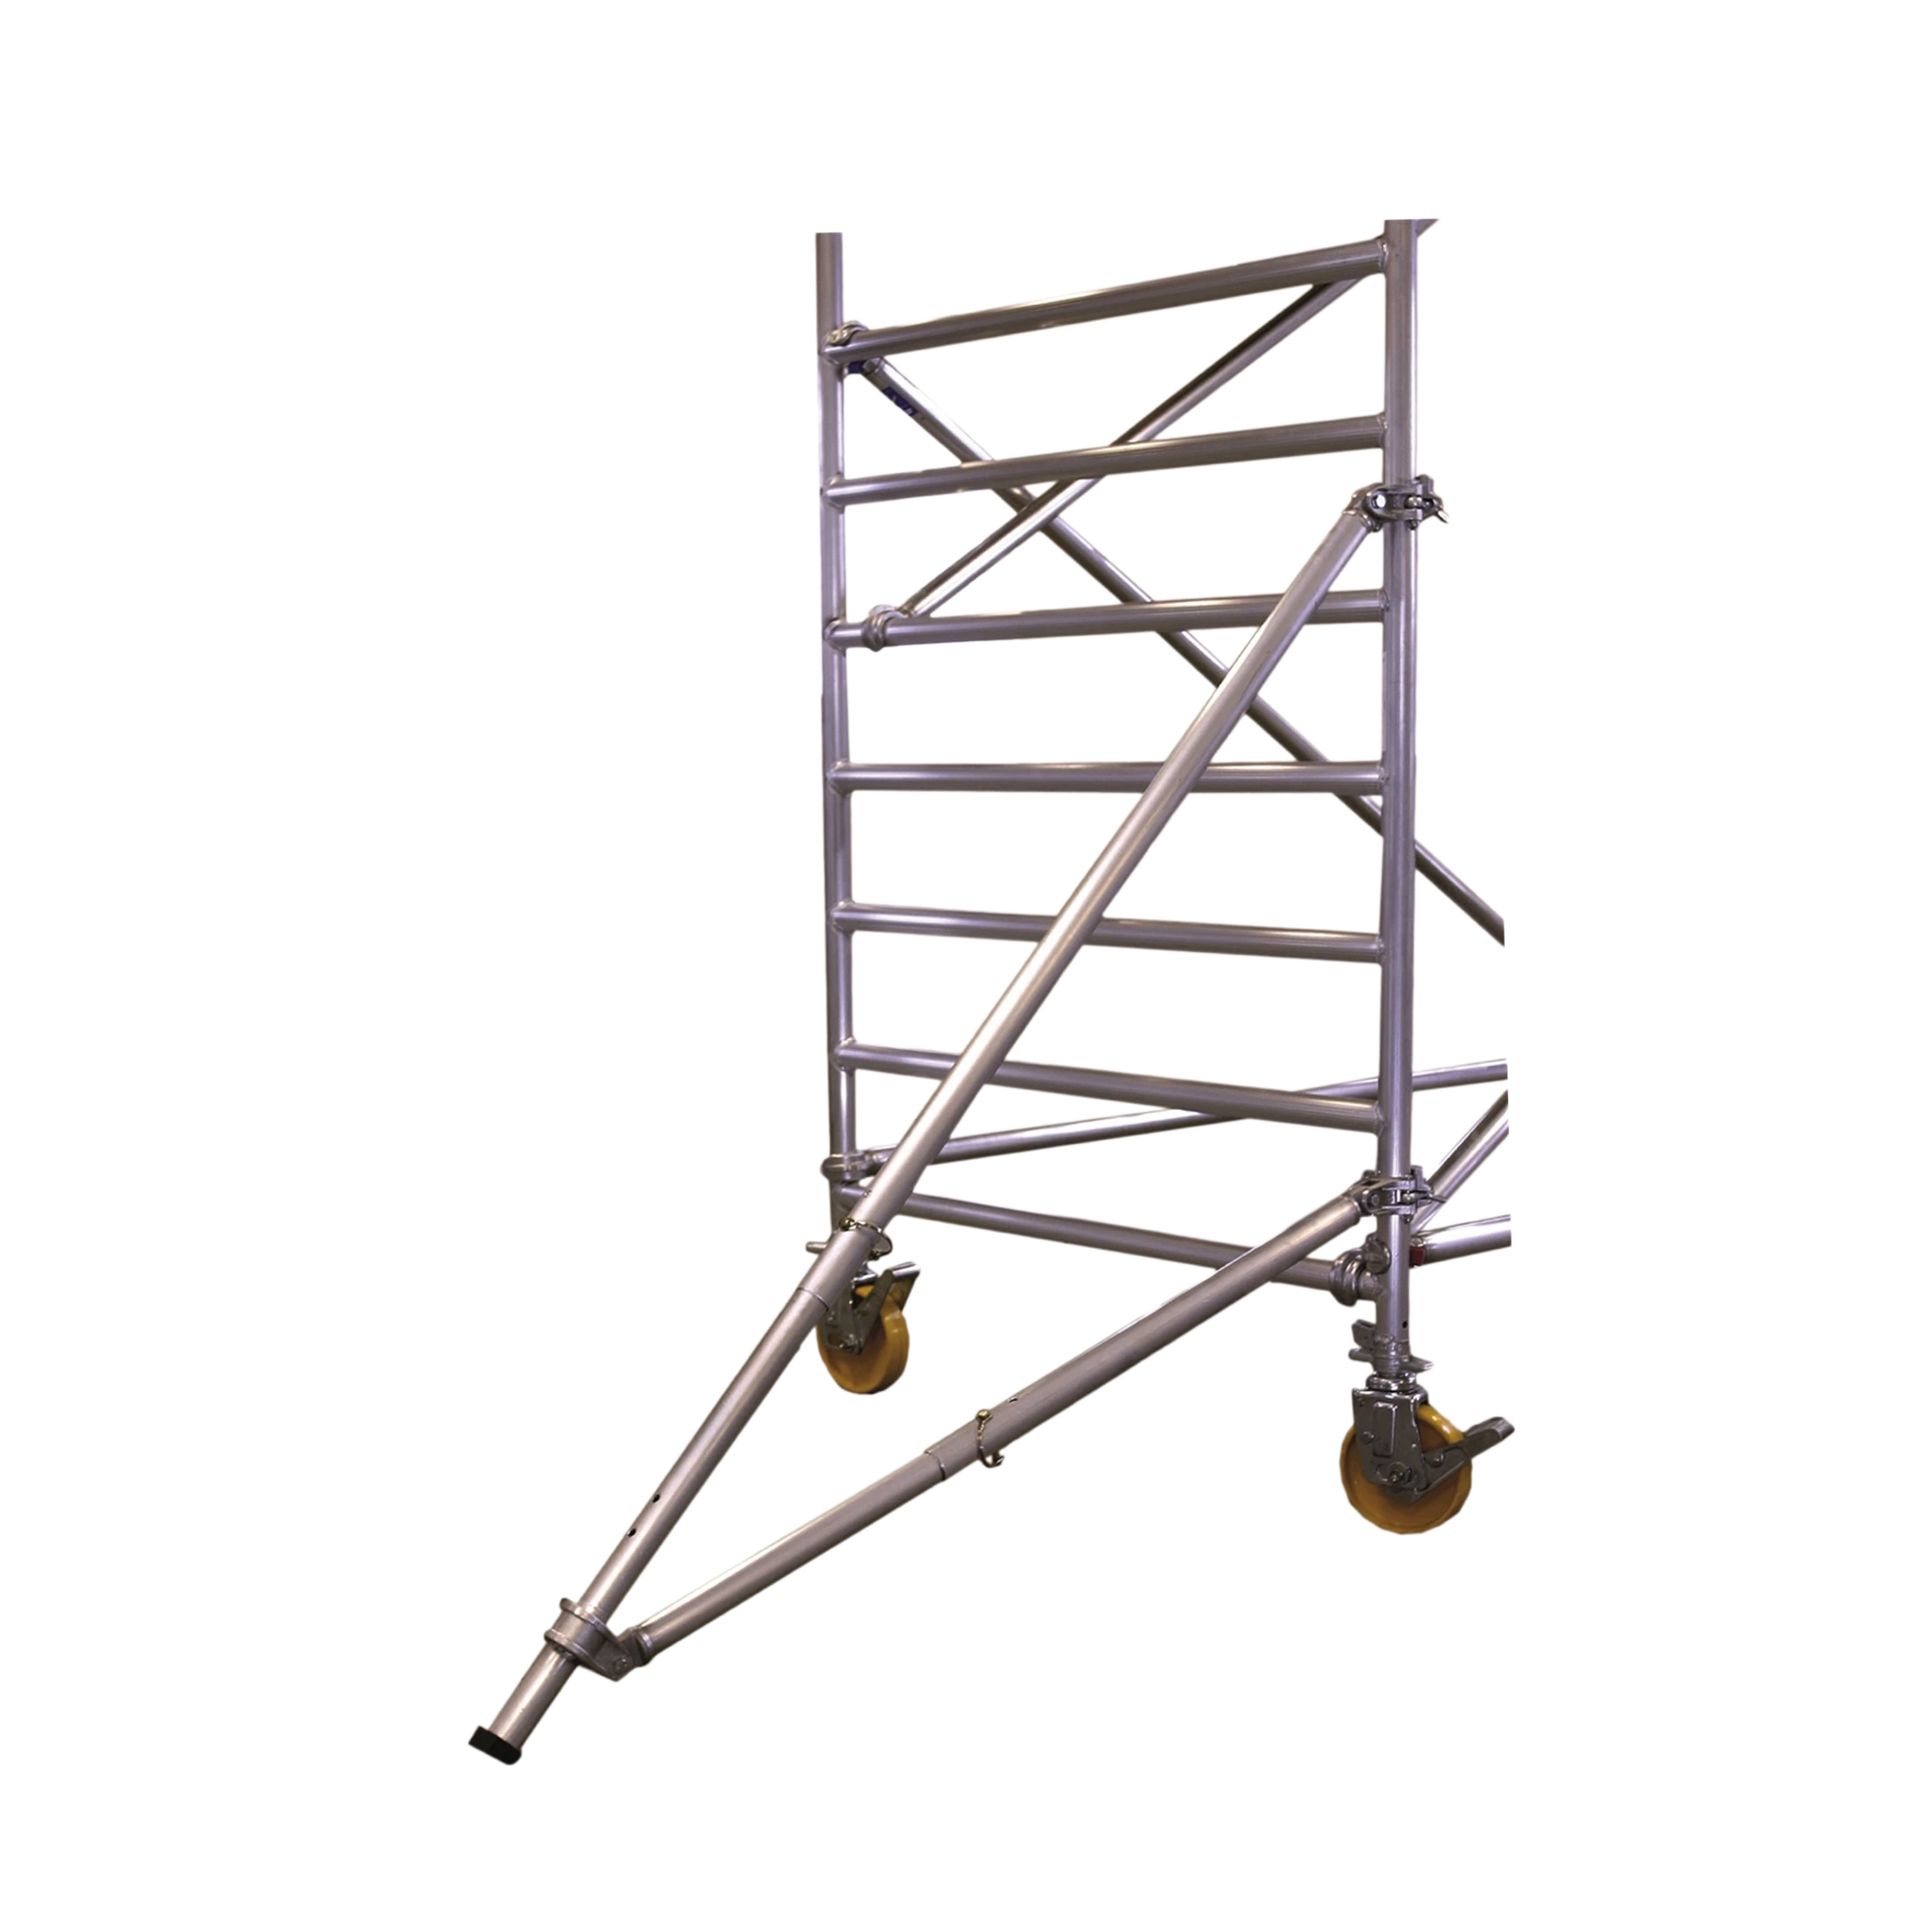 Support legs for scaffolding